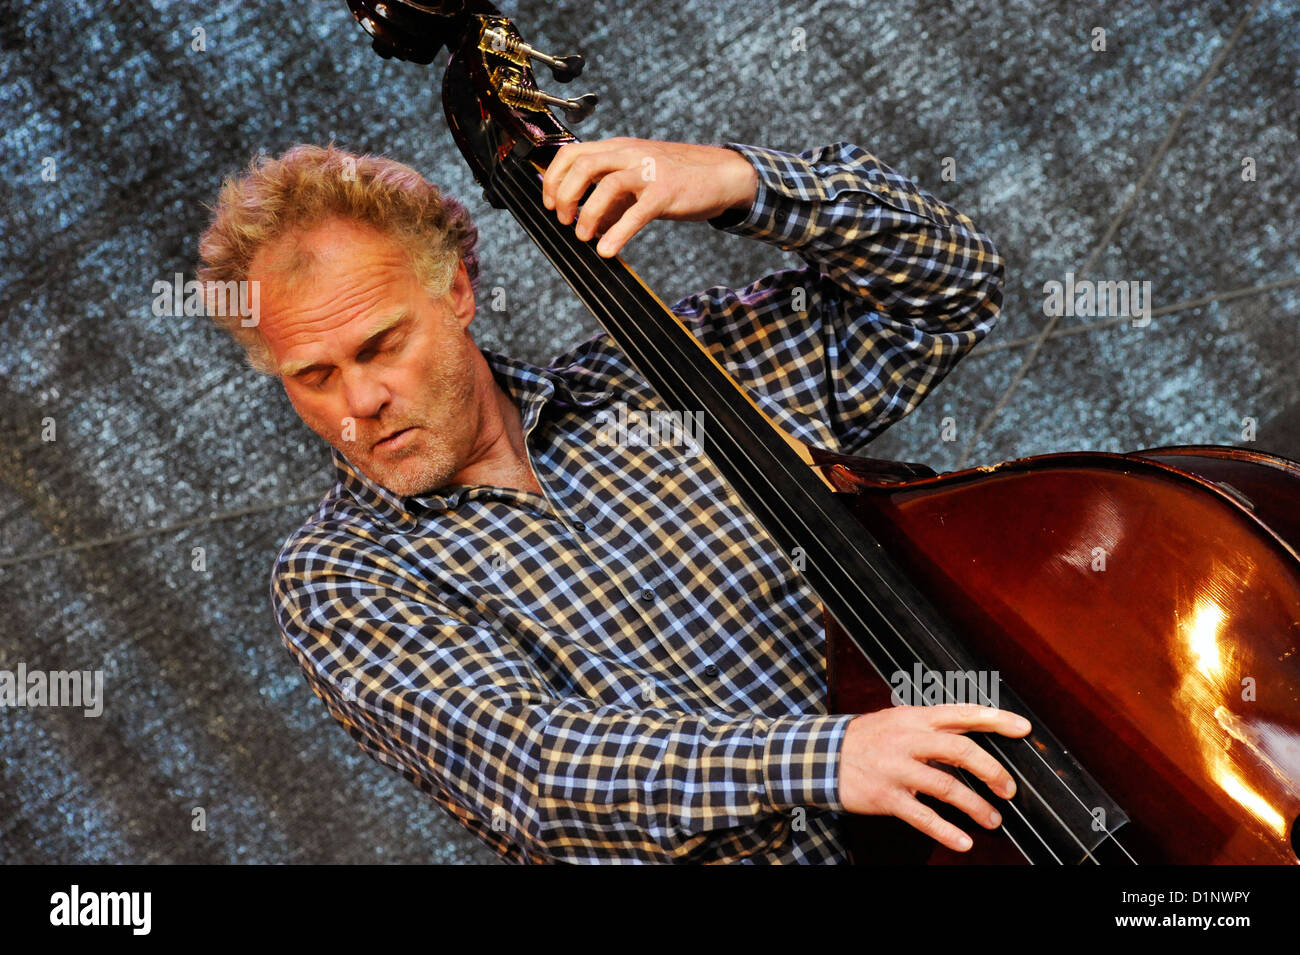 Swedish bass player Anders Jormin performing with Bobo Stenson at Stockholm Jazz Festival. Stock Photo